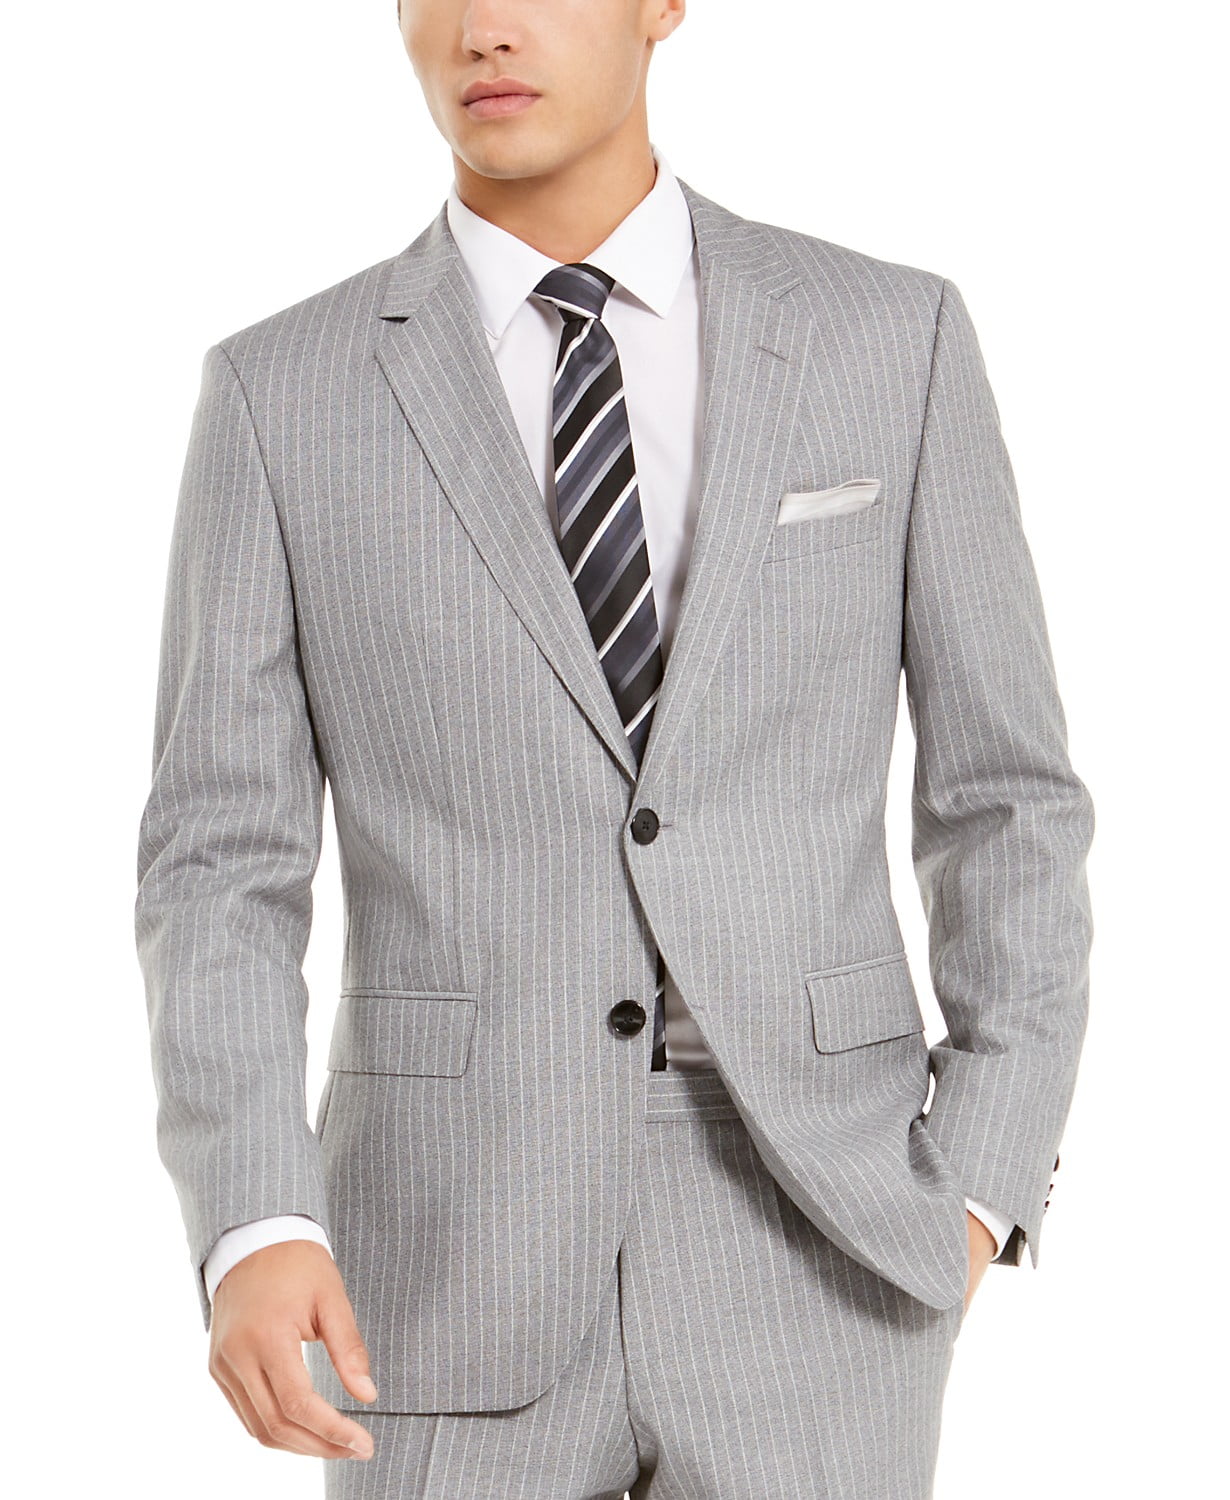 Just Cavalli Men's Gray 100% Wool Striped Suit Size US 38 IT 48 at Amazon  Men's Clothing store